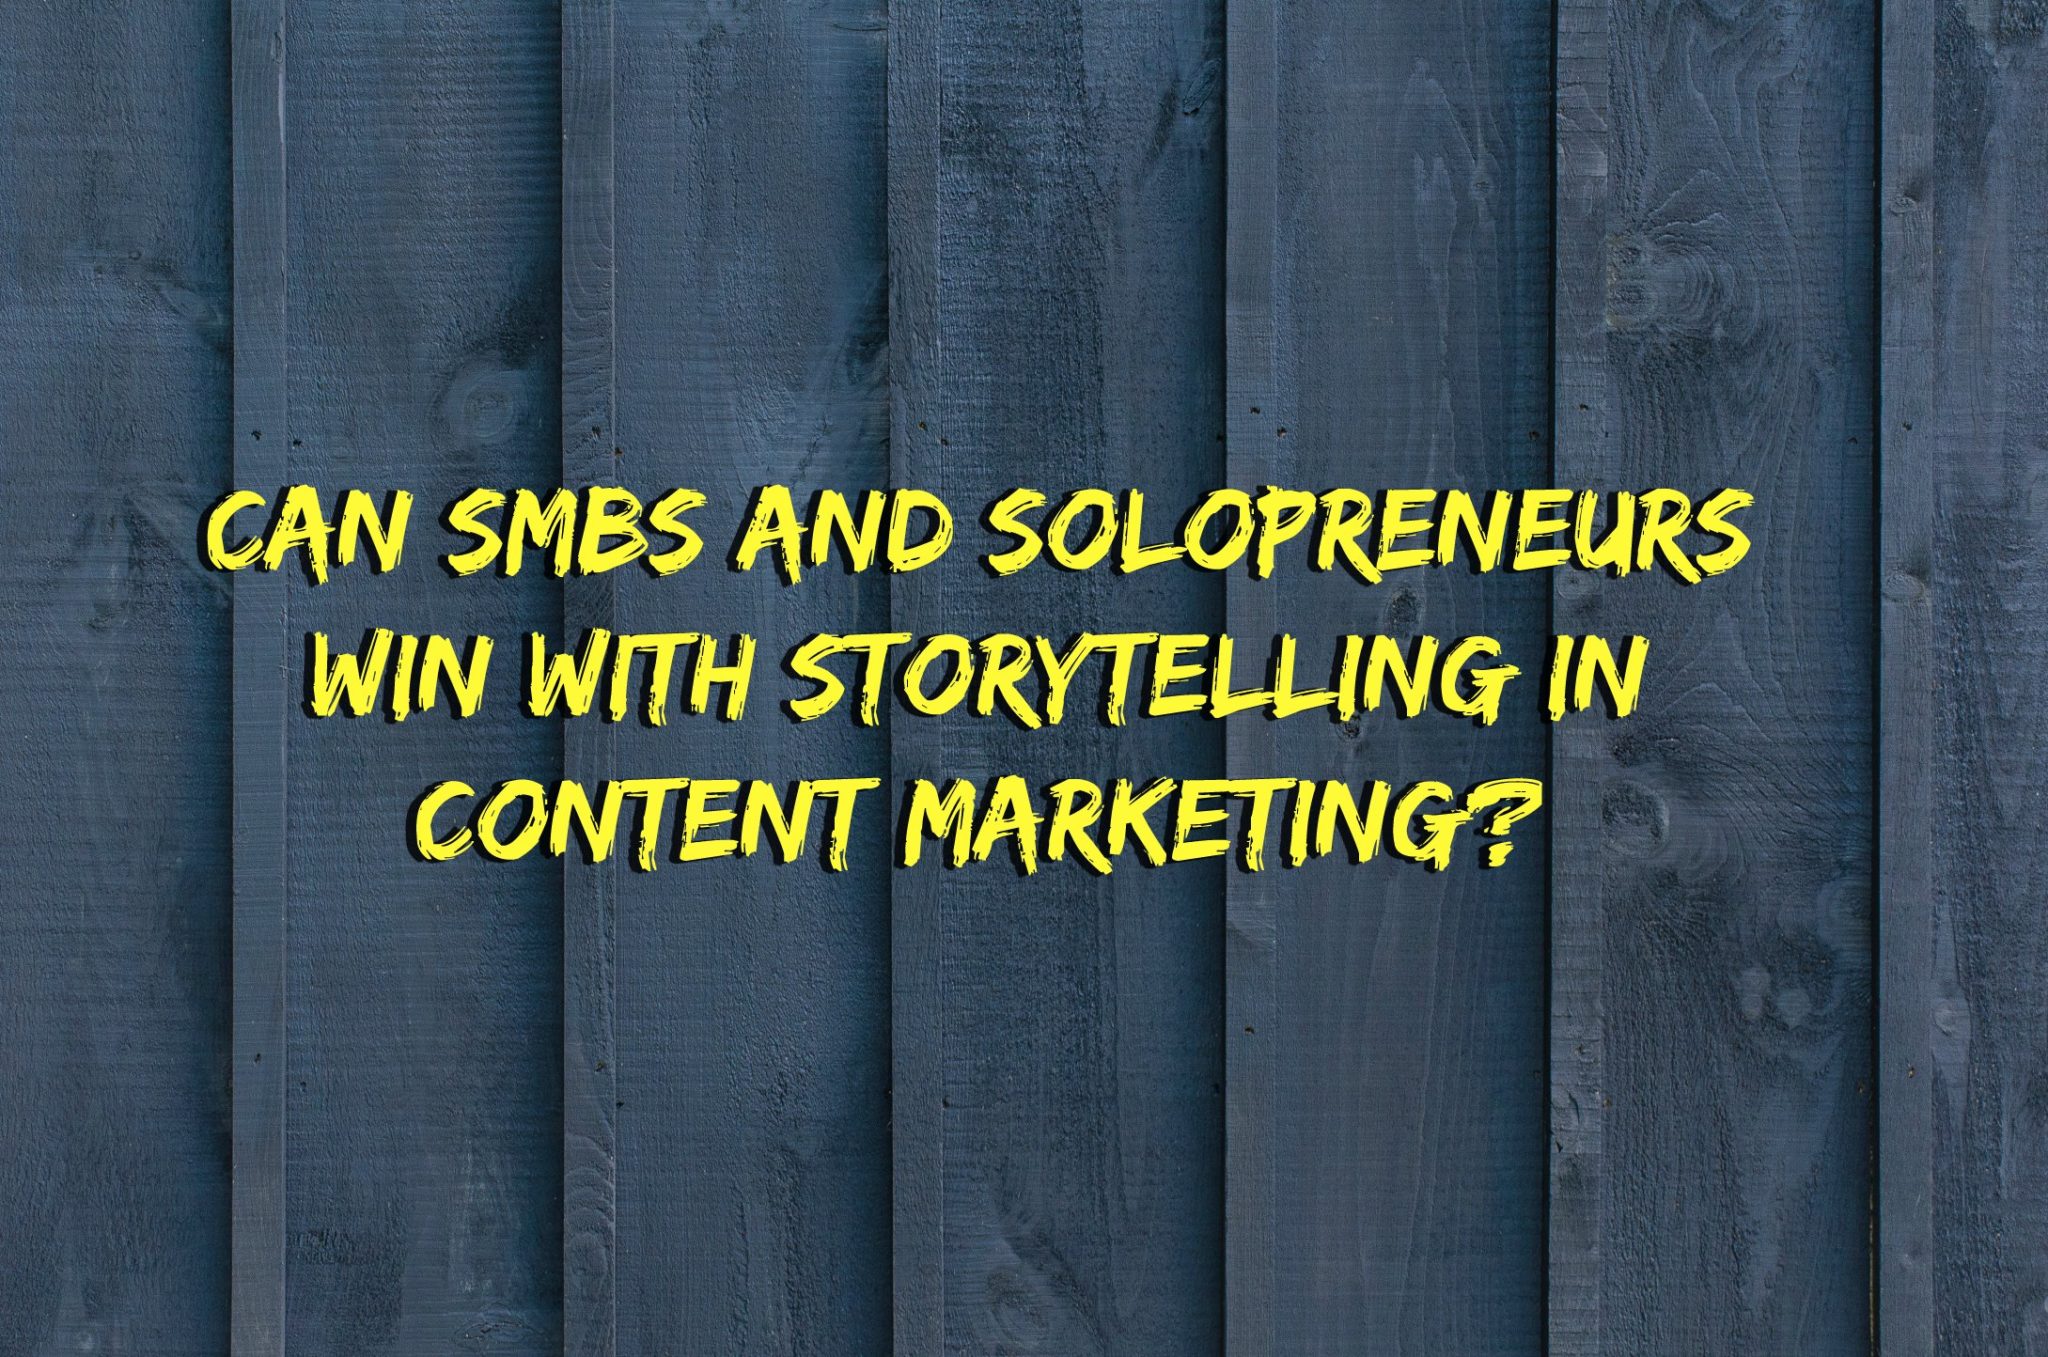 Do you have to be one of the big guys to use storytelling in content marketing?